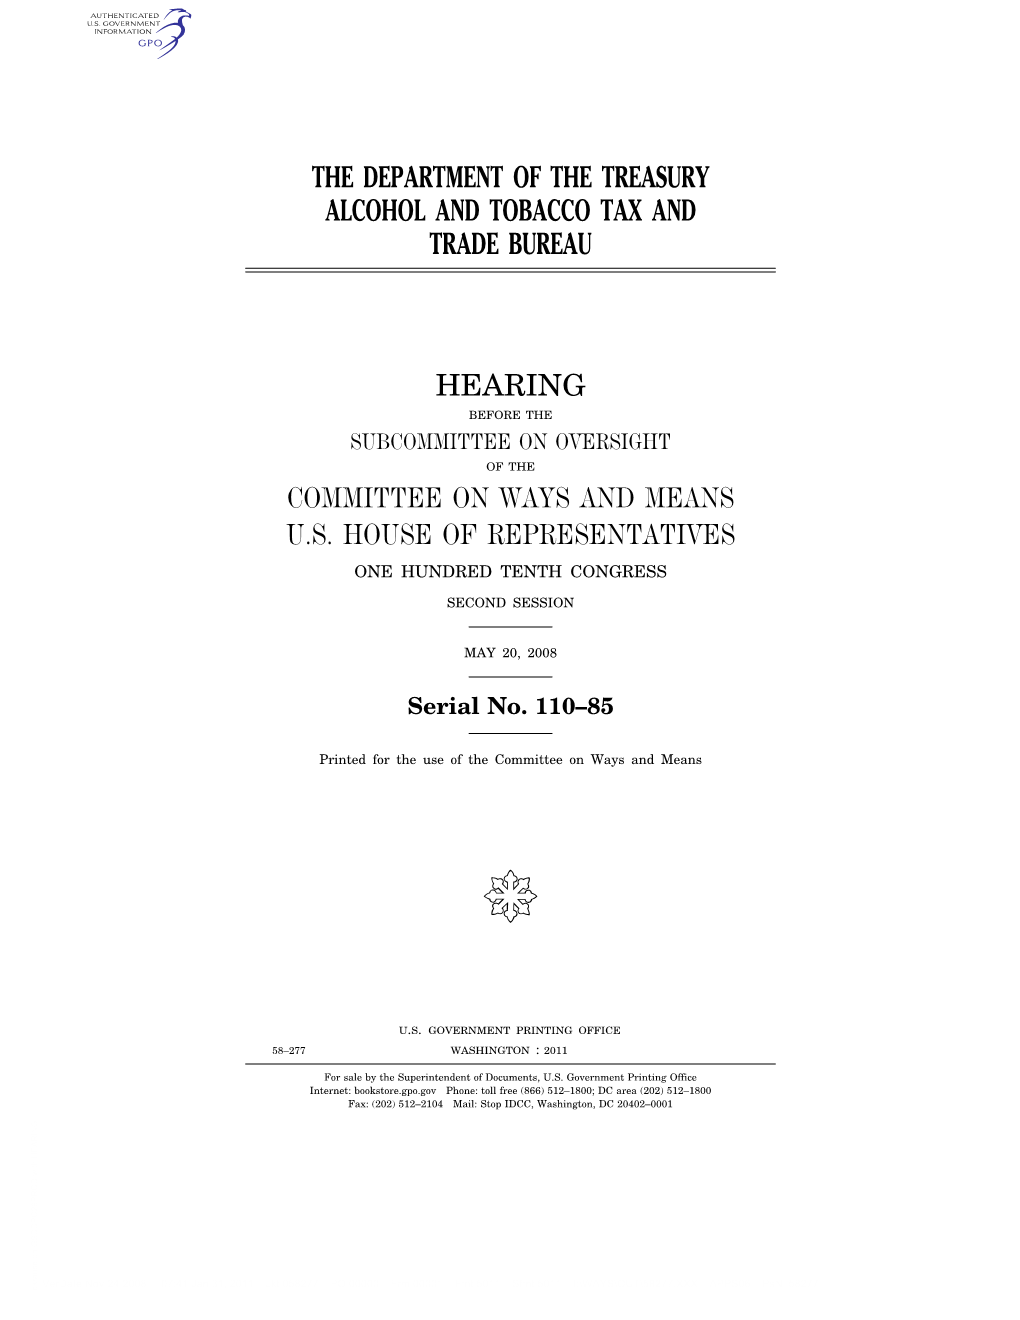 The Department of the Treasury Alcohol and Tobacco Tax and Trade Bureau